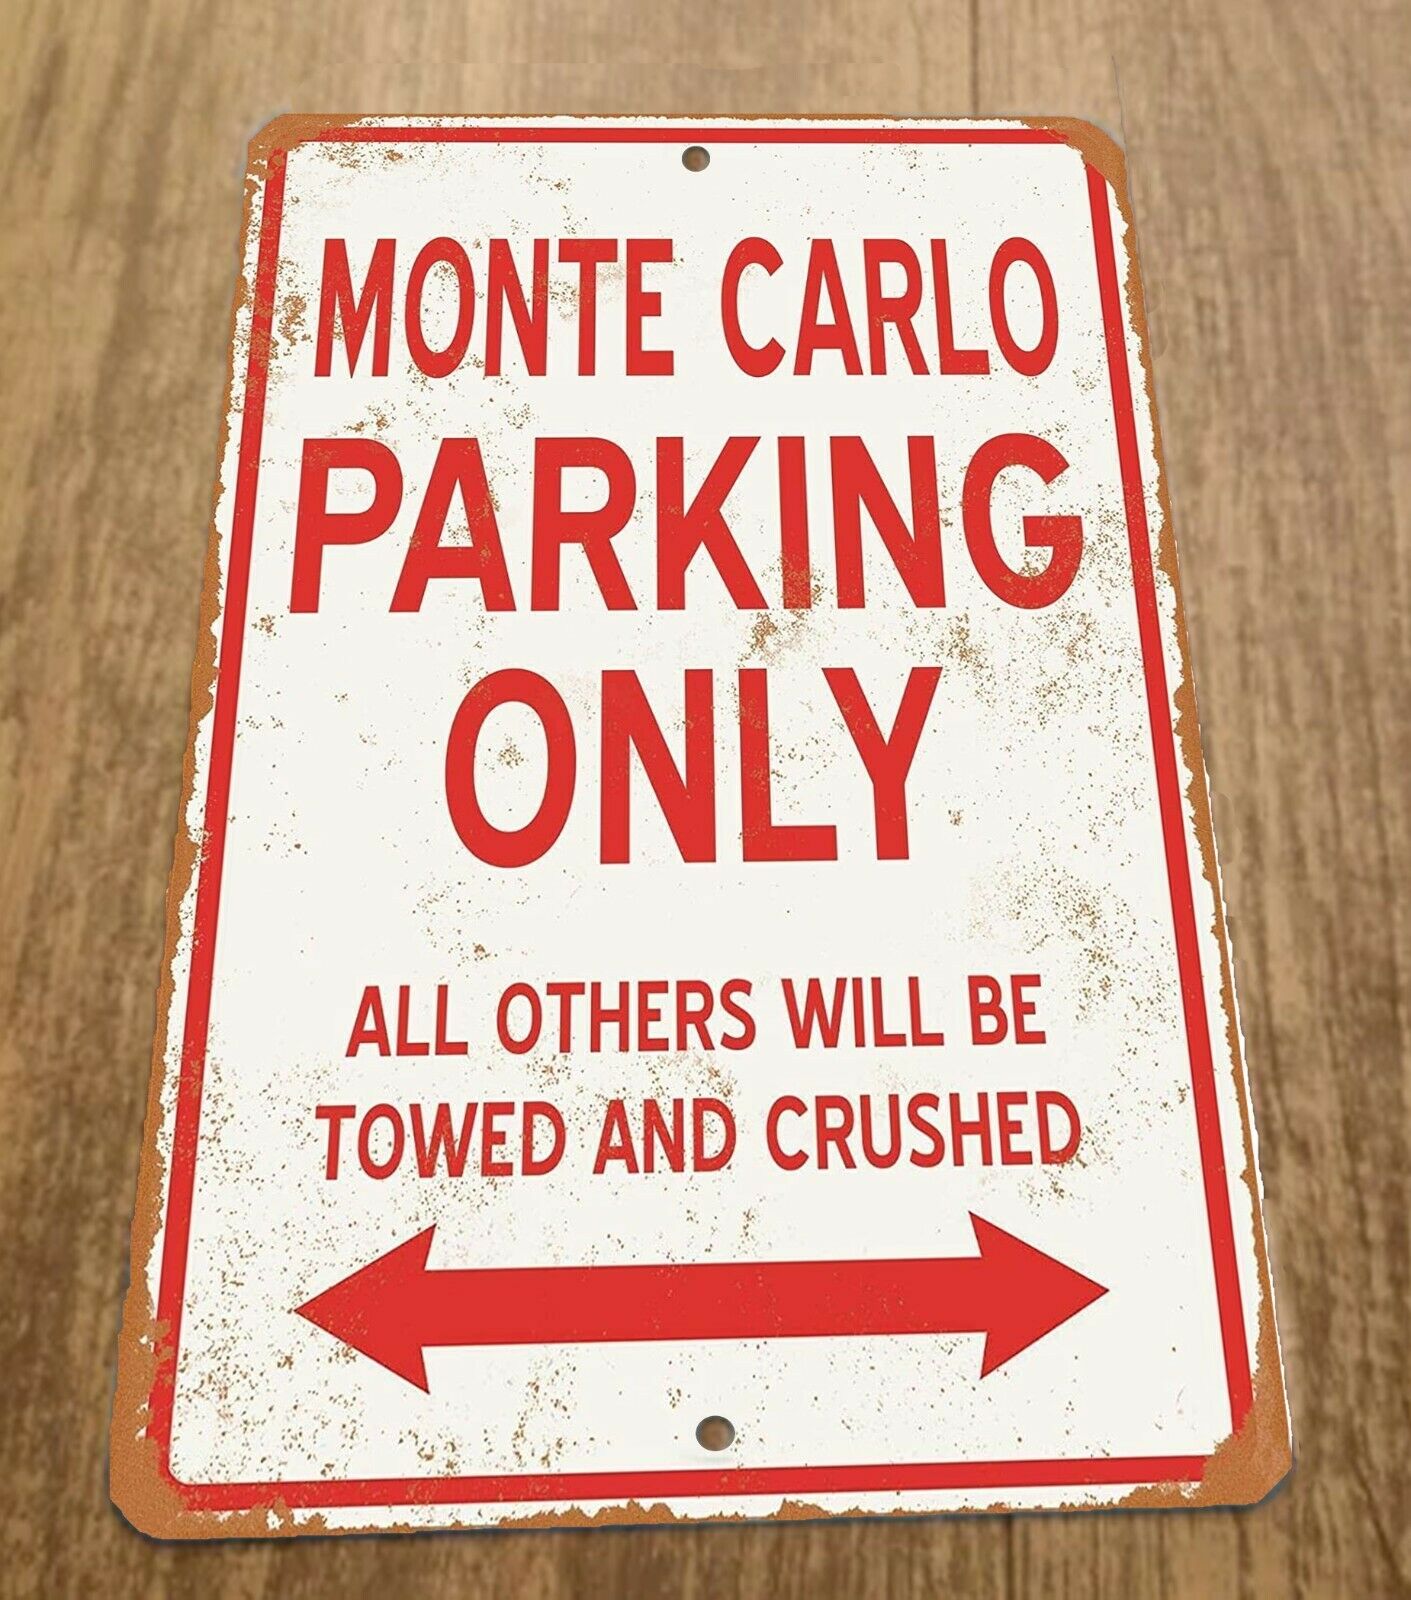 Monte Carlo Parking Only 8x12 Metal Wall Car Sign Garage Poster